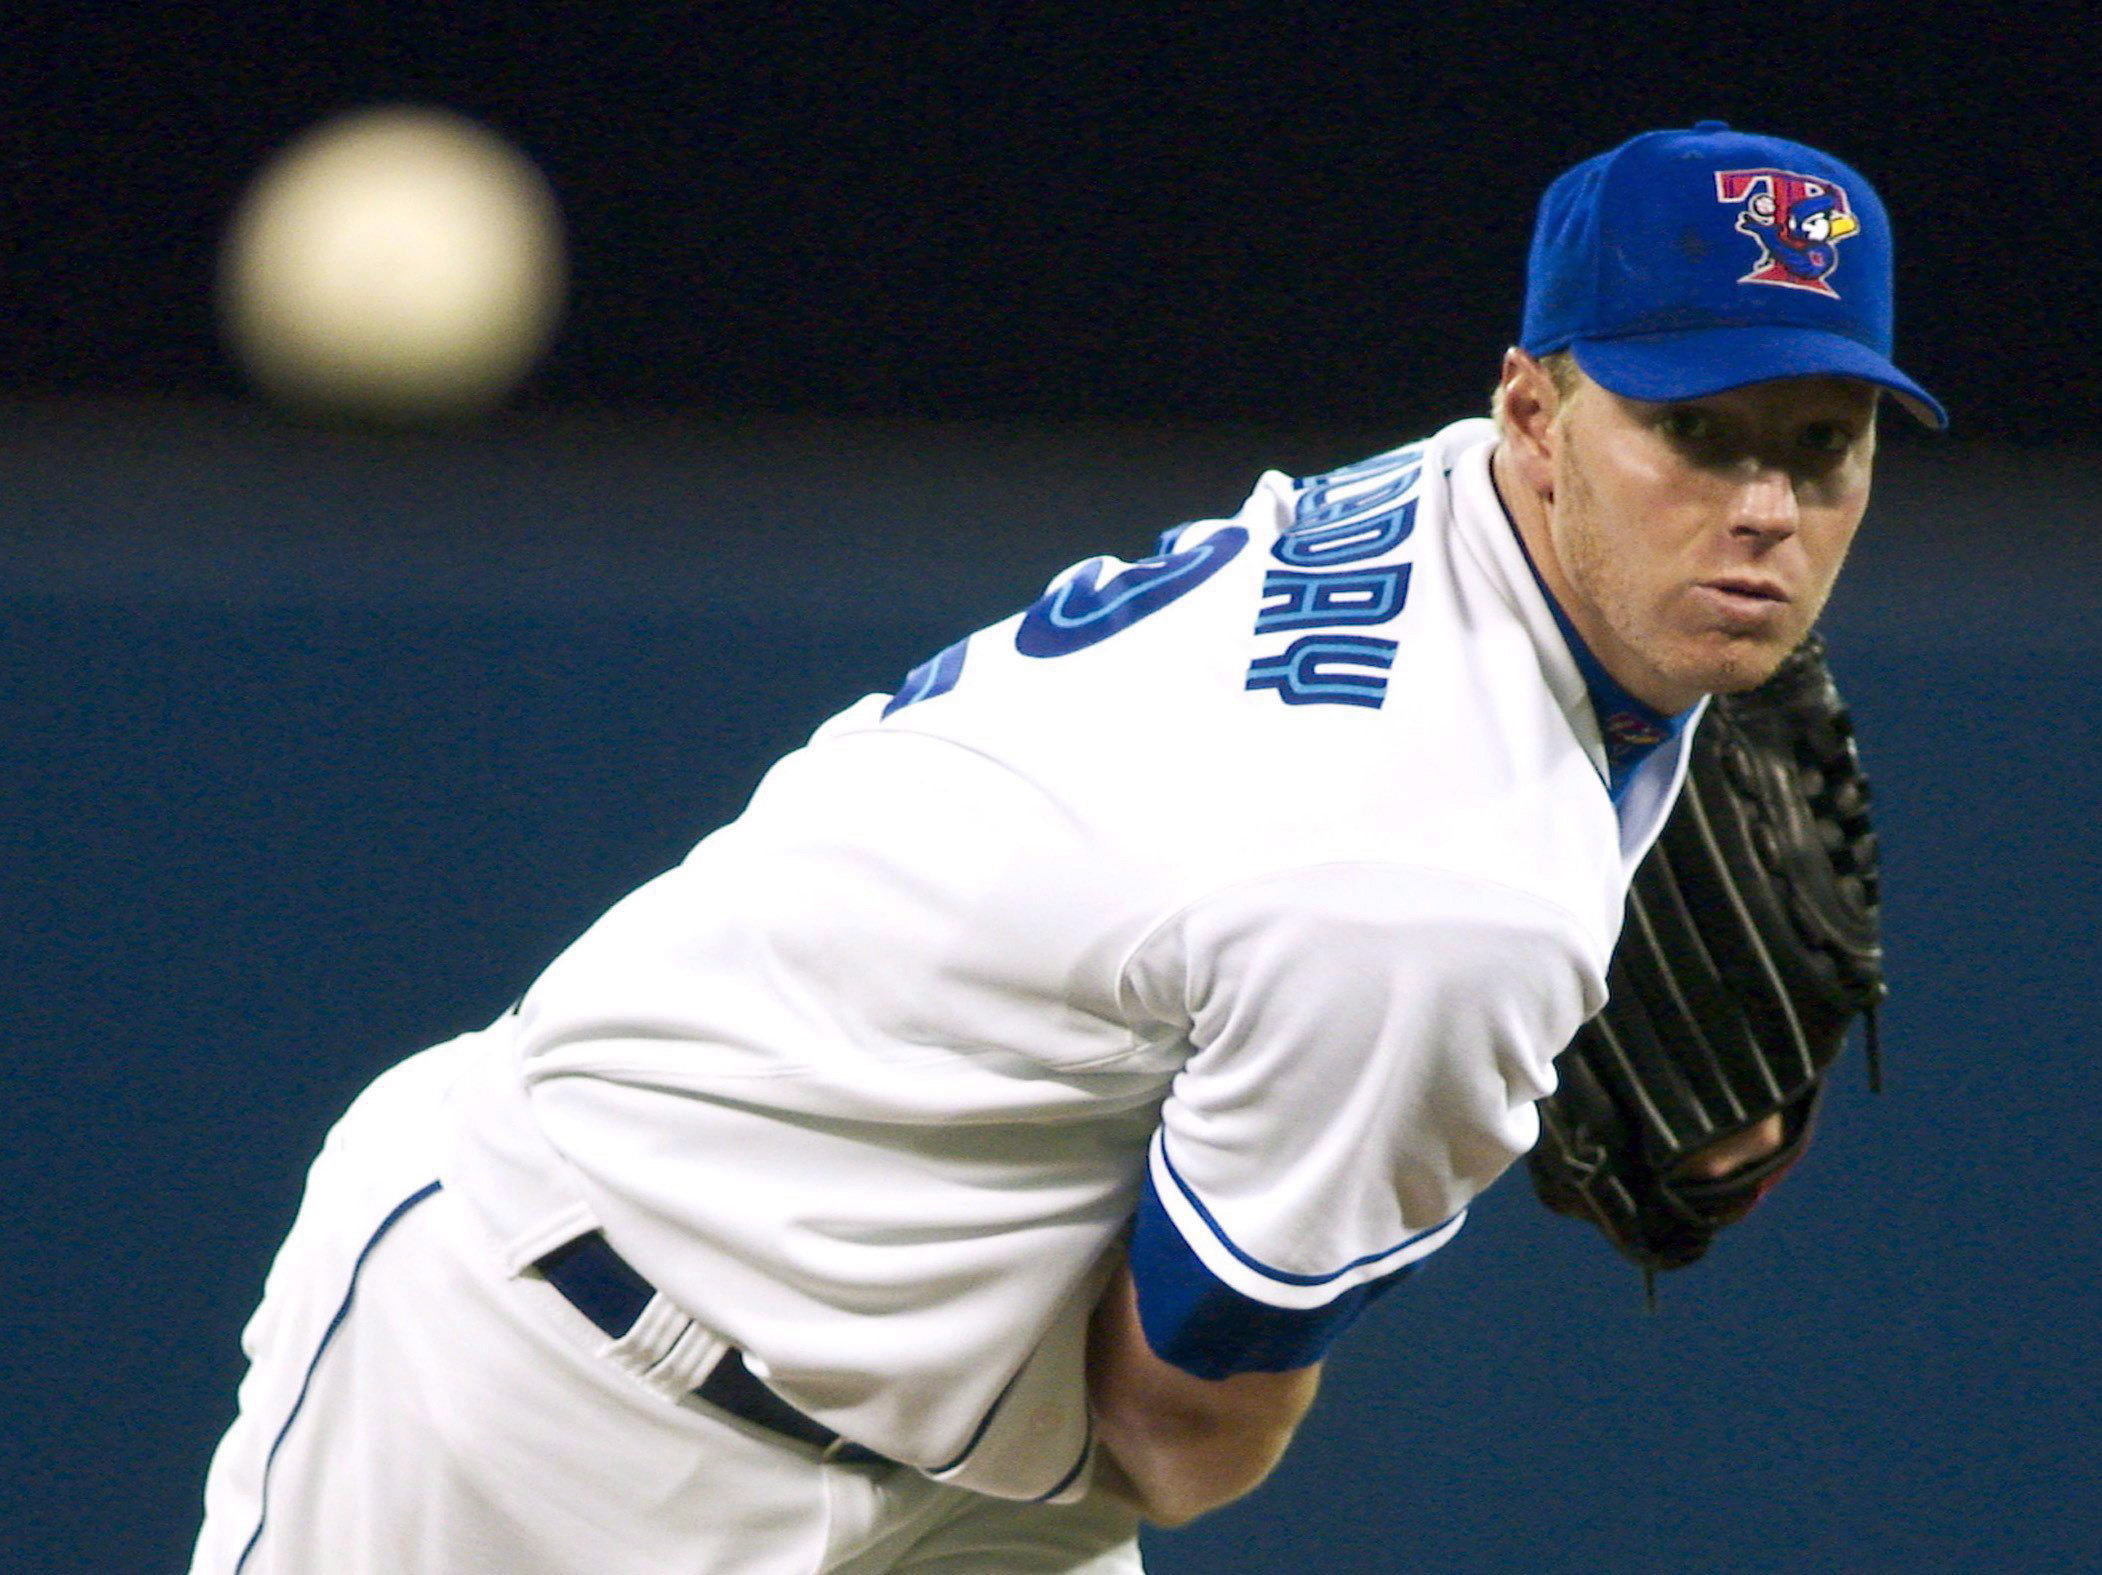 Toronto Blue Jays draft Roy Halladay's son in tribute to late pitcher